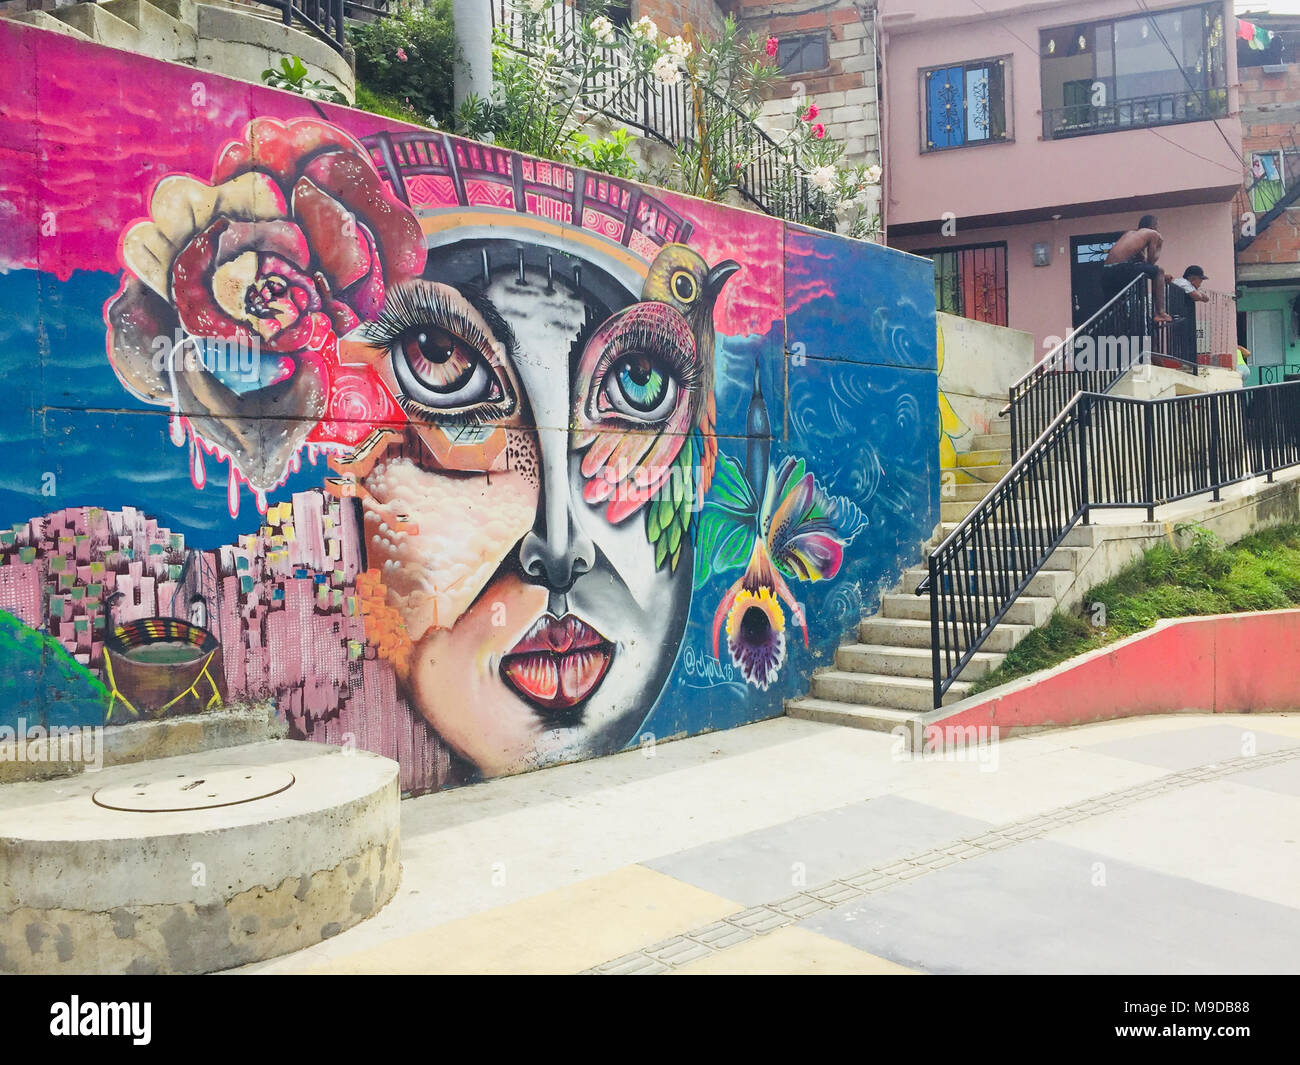 Medellin, Colombia - february 2018:Graffiti mural paintings in the streets of Comuna 13 in Medellin, Colombia. Stock Photo